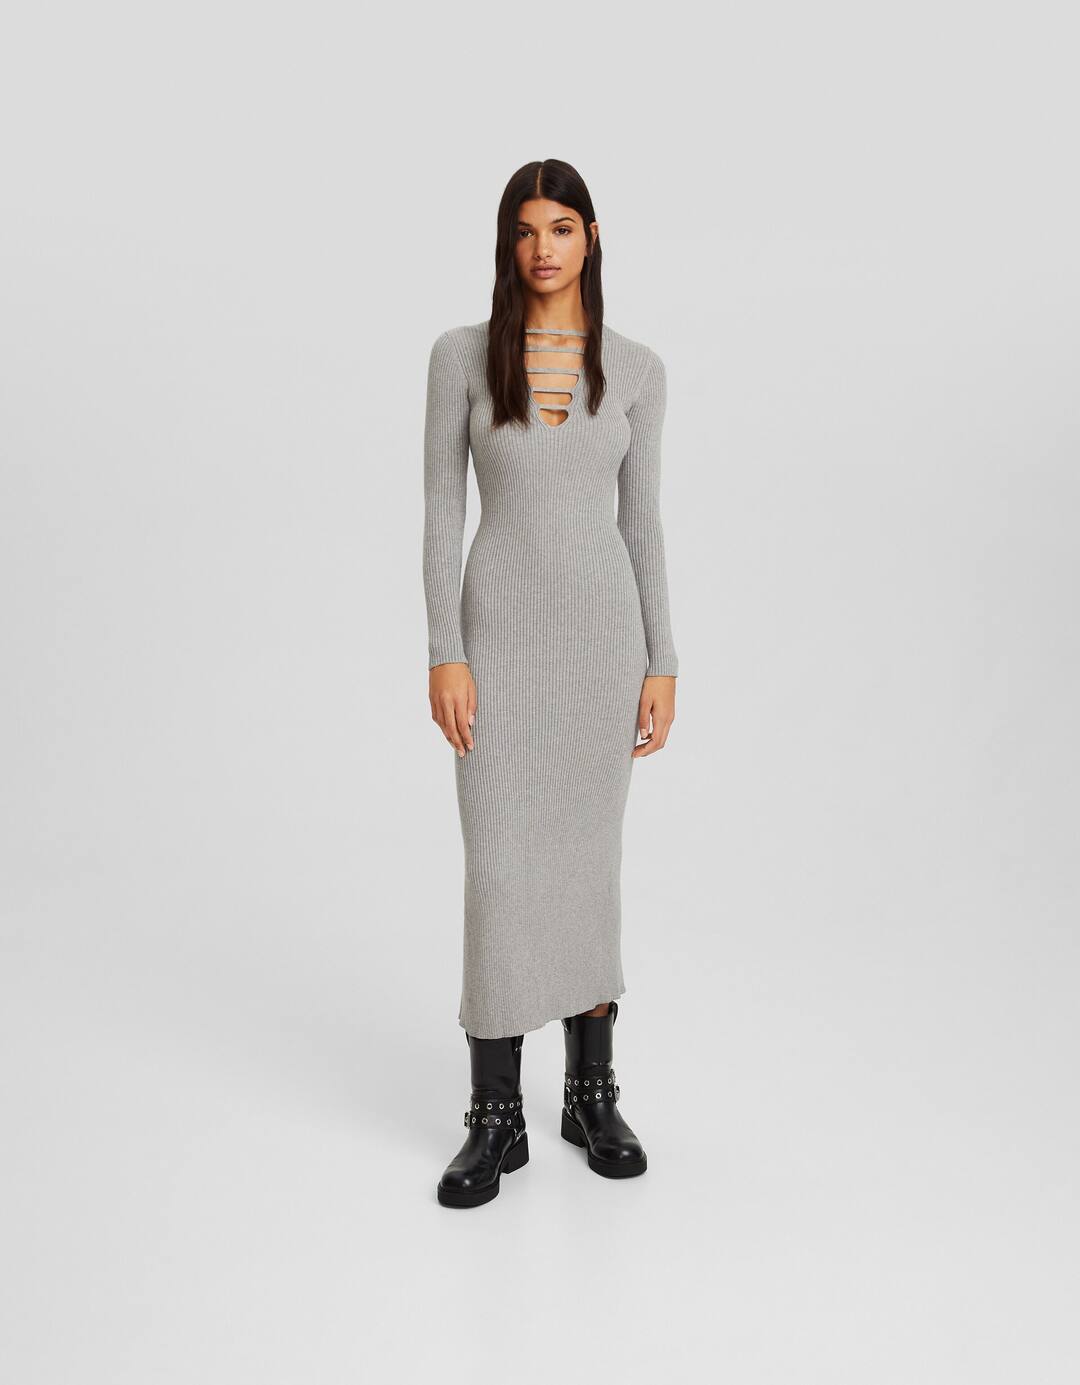 Long ribbed knit dress with long sleeves and plunging neckline